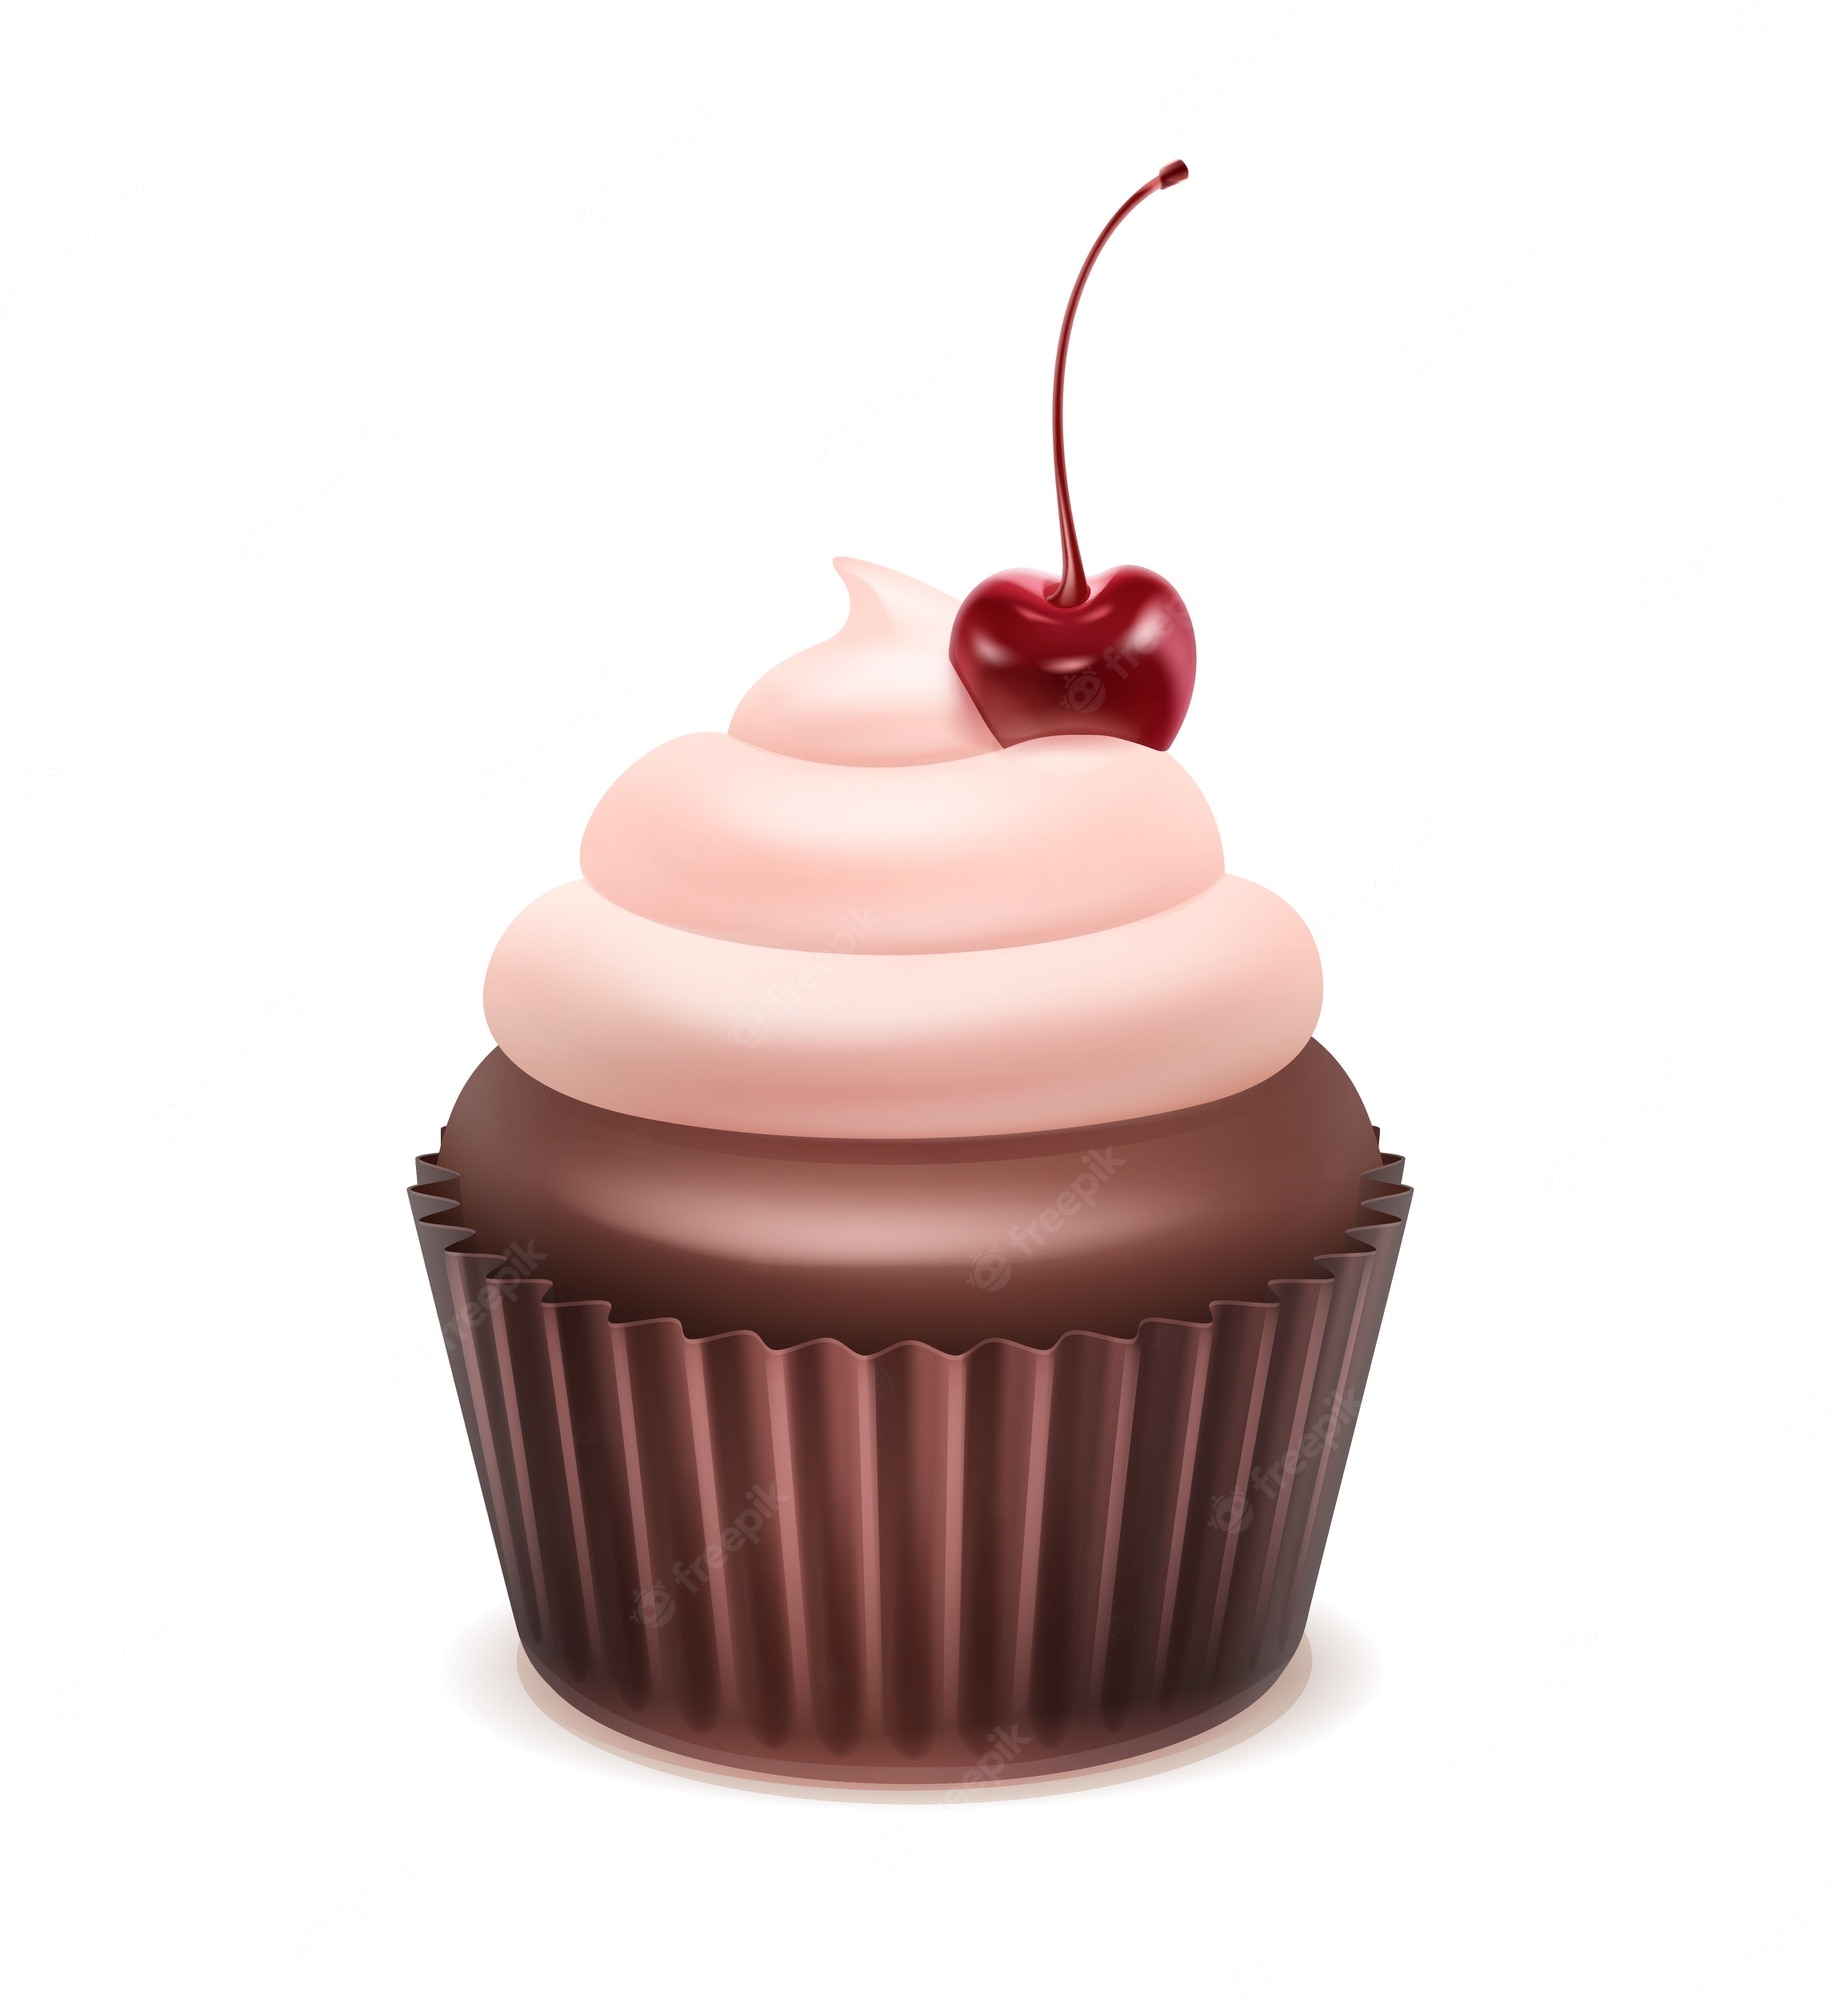 Real Cupcake Background